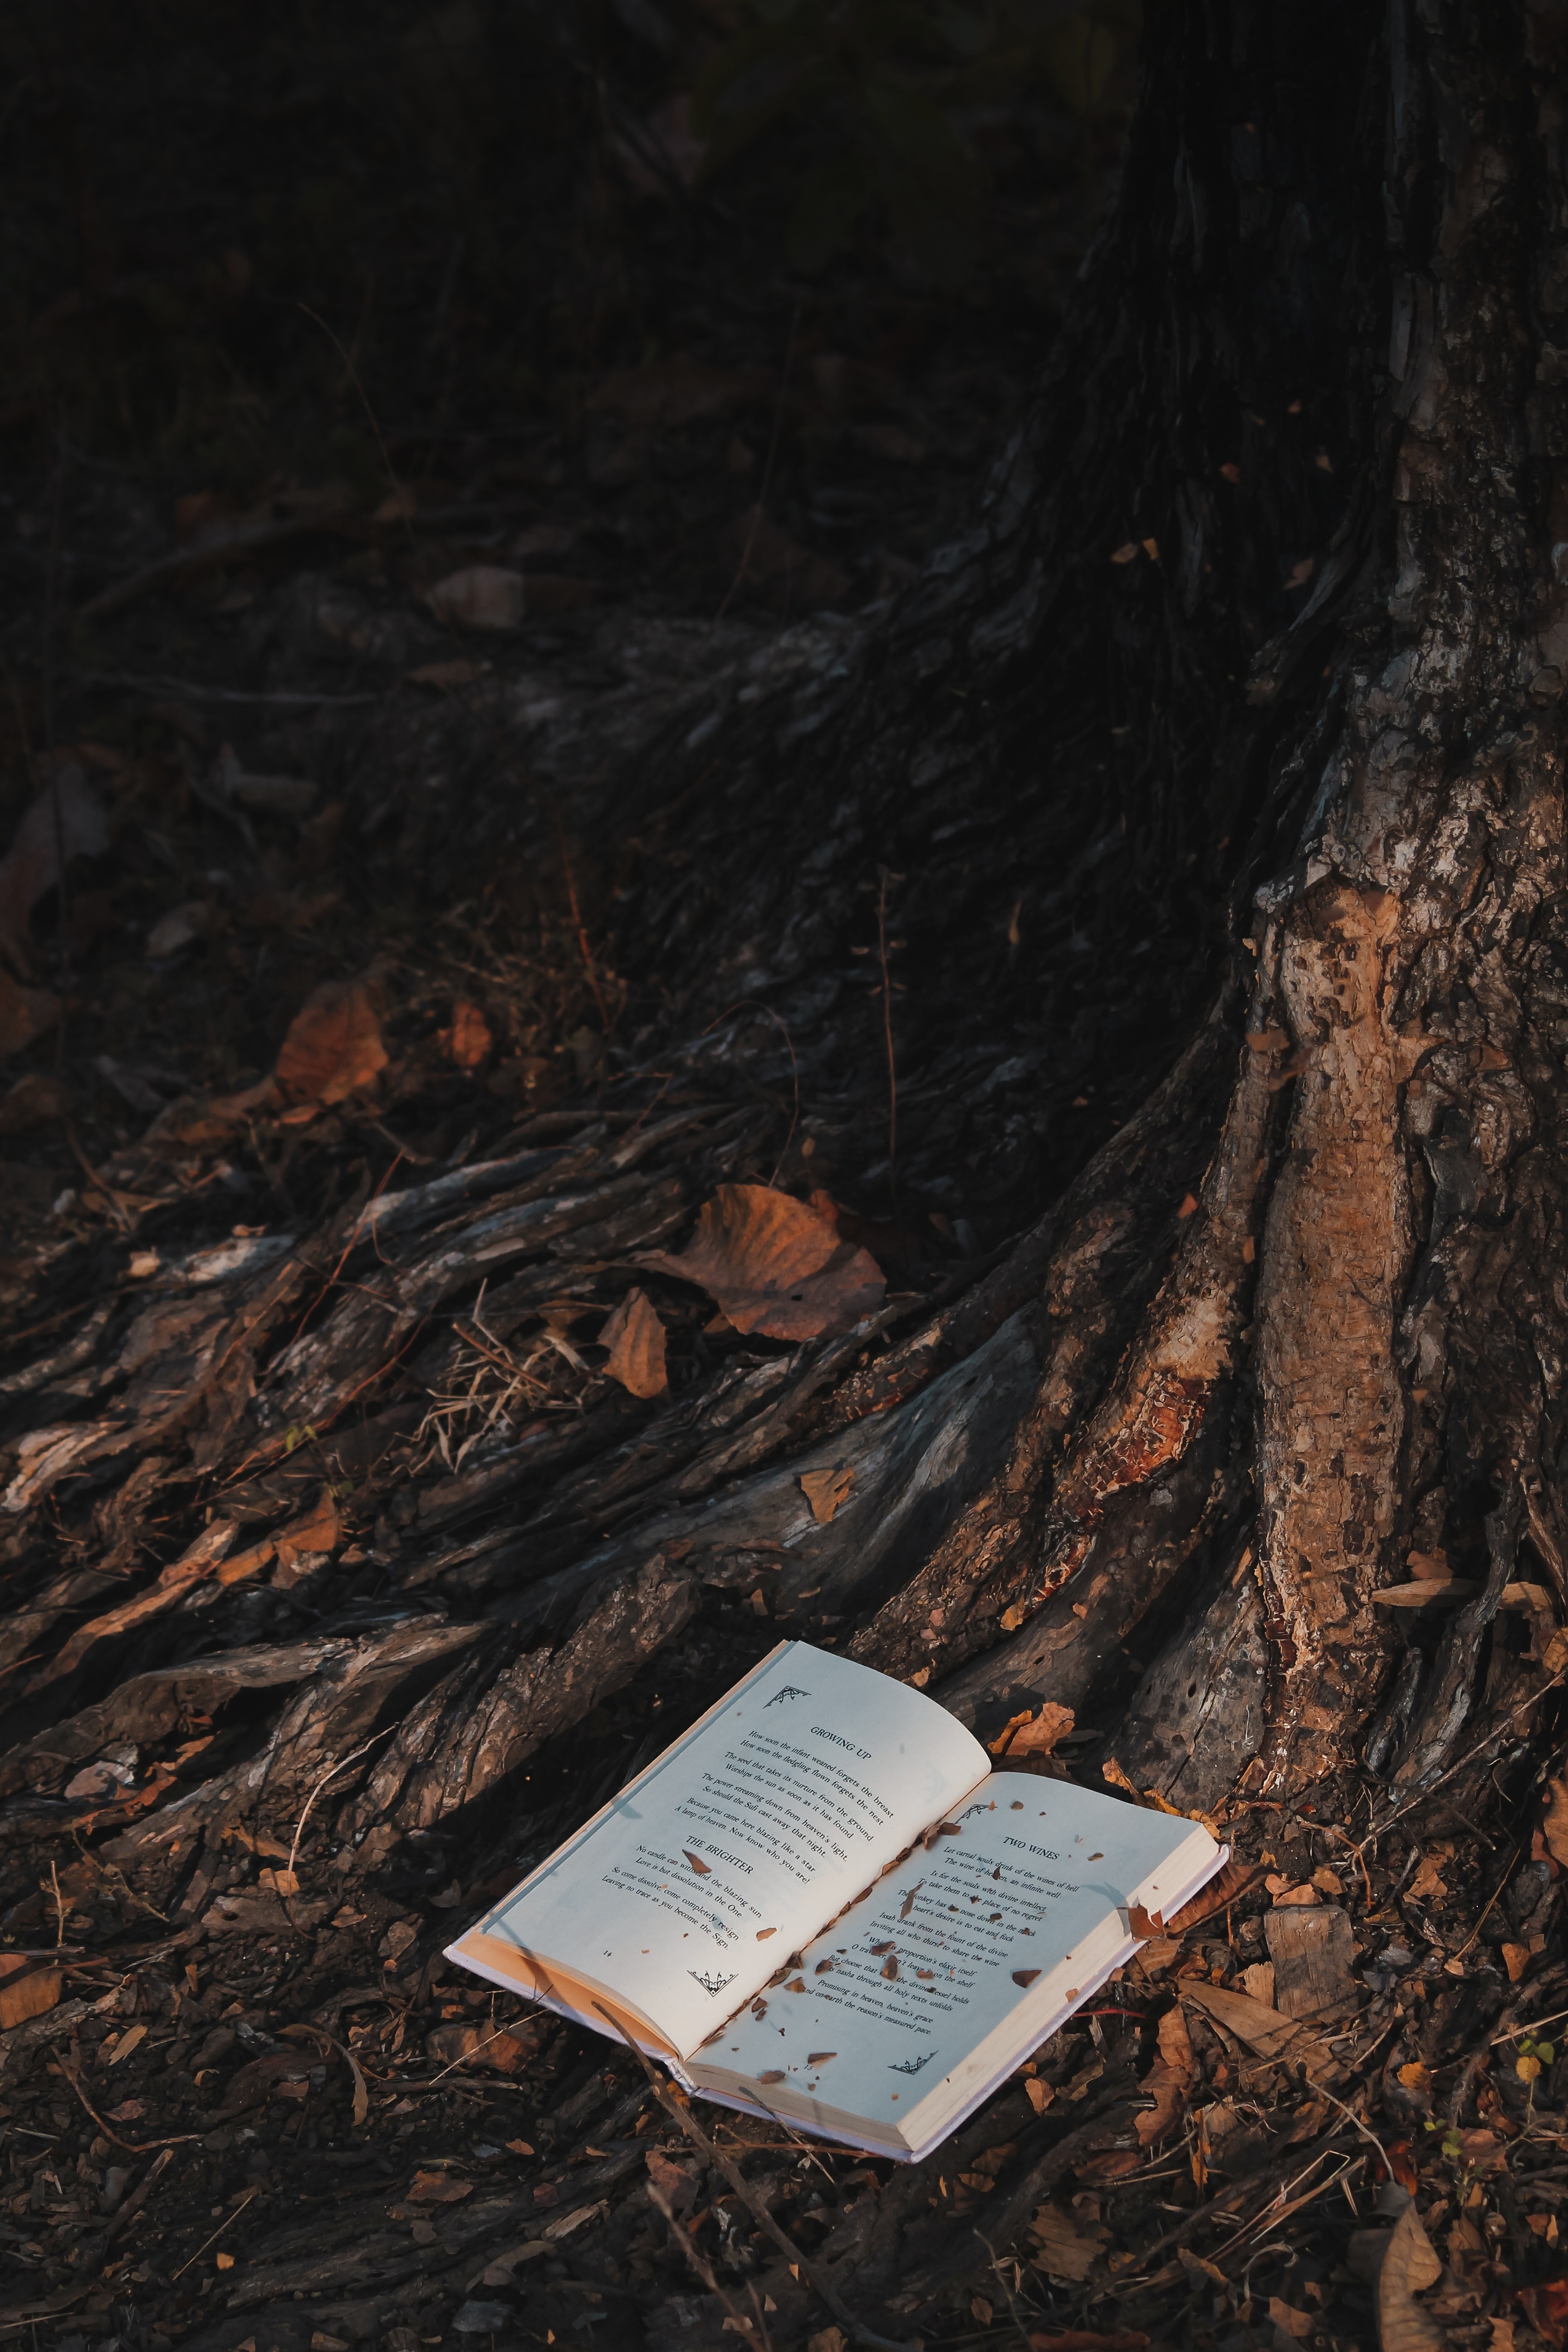 miscellanea, wood, forest, book, miscellaneous, tree download HD wallpaper